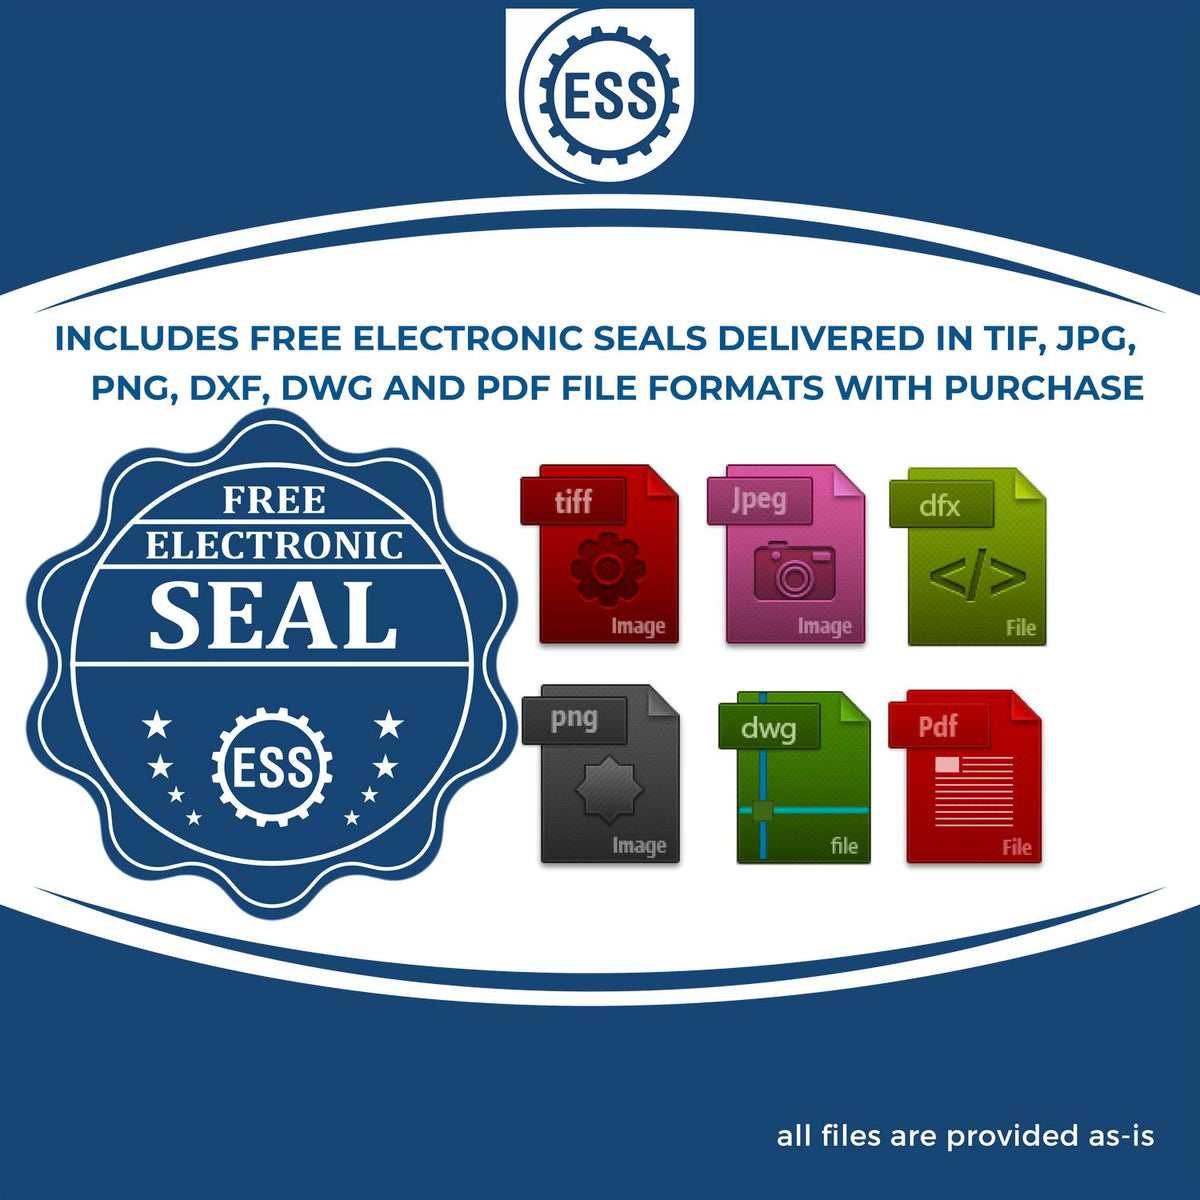 An infographic for the free electronic seal for the Slim Pre-Inked Delaware Architect Seal Stamp illustrating the different file type icons such as DXF, DWG, TIF, JPG and PNG.